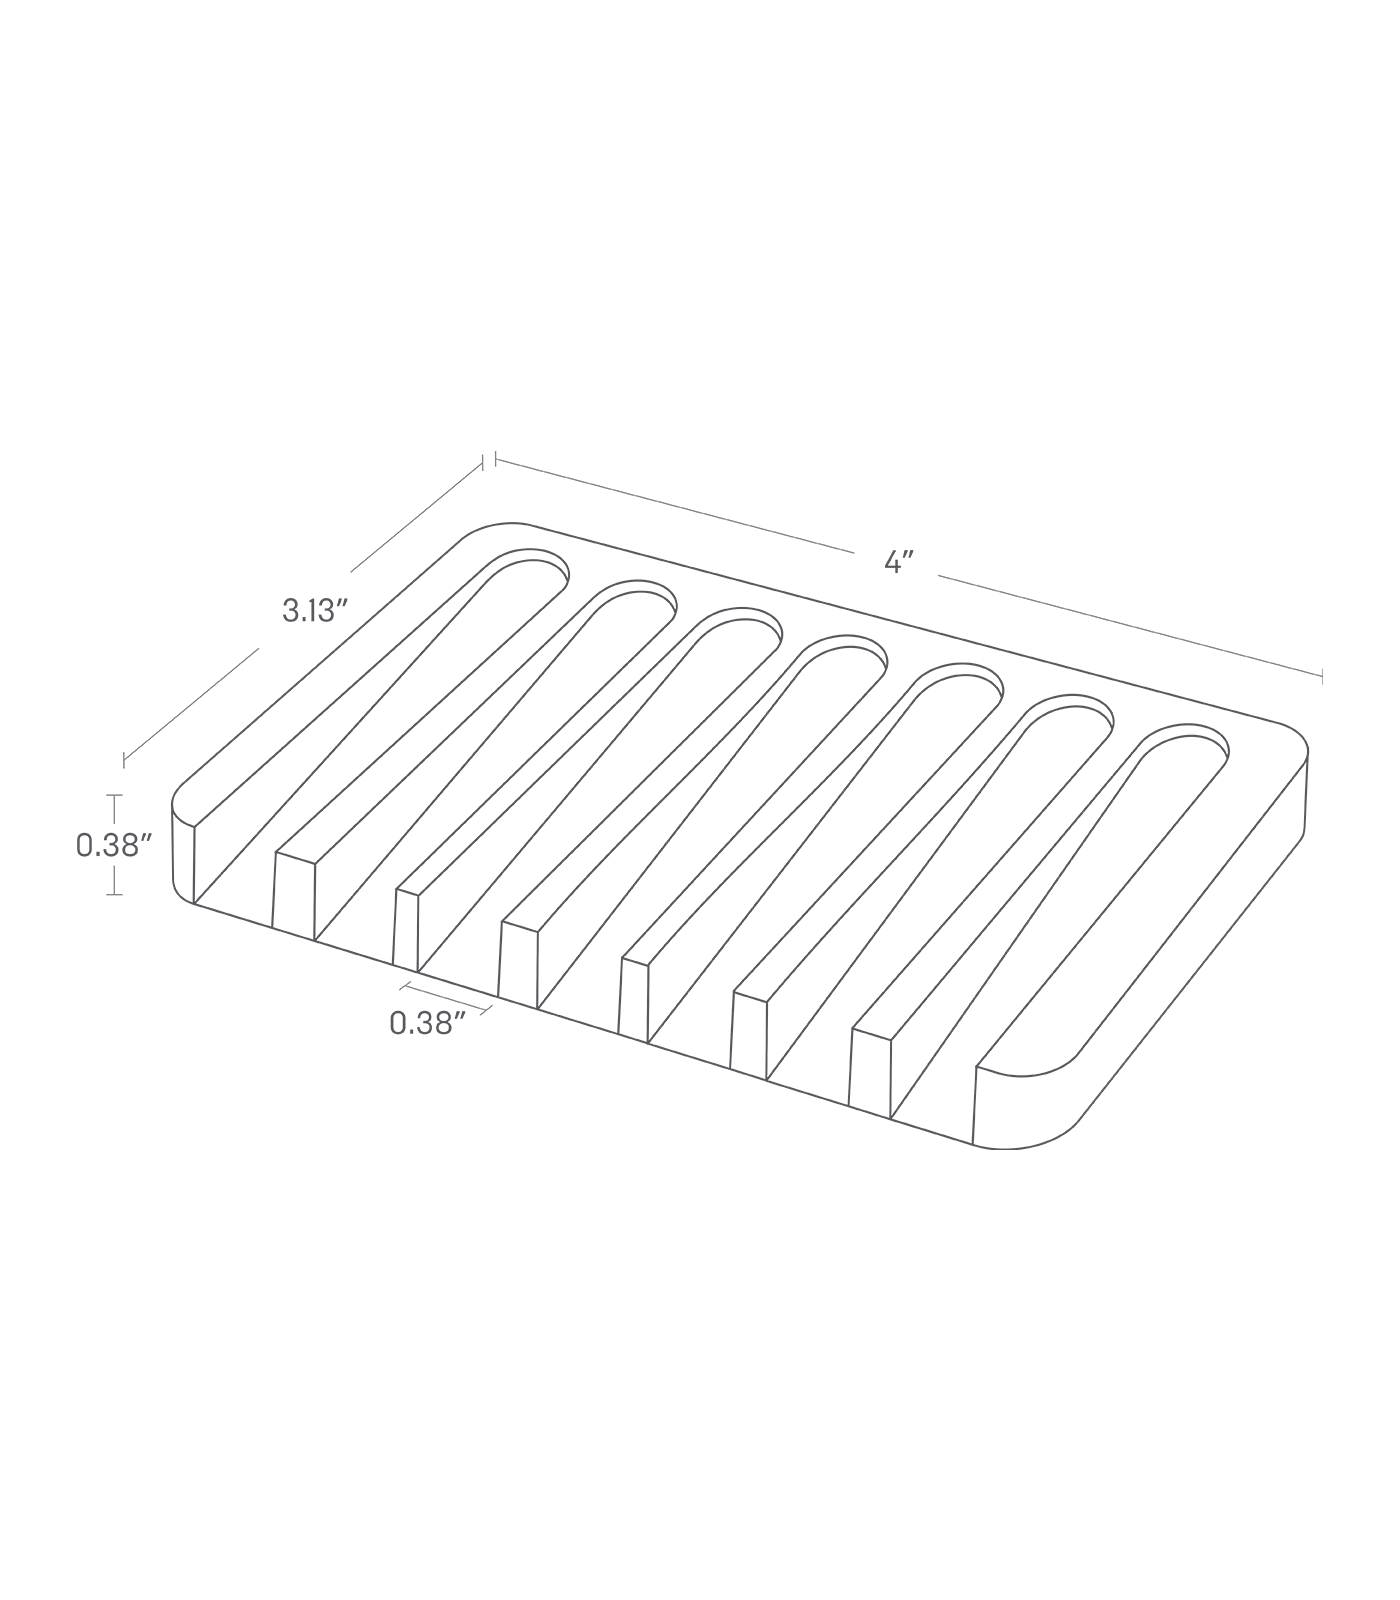 Dimension image for Self-Draining Soap Tray on a white background including dimensions  L 3.15 x W 4.53 x H 0.39 inches